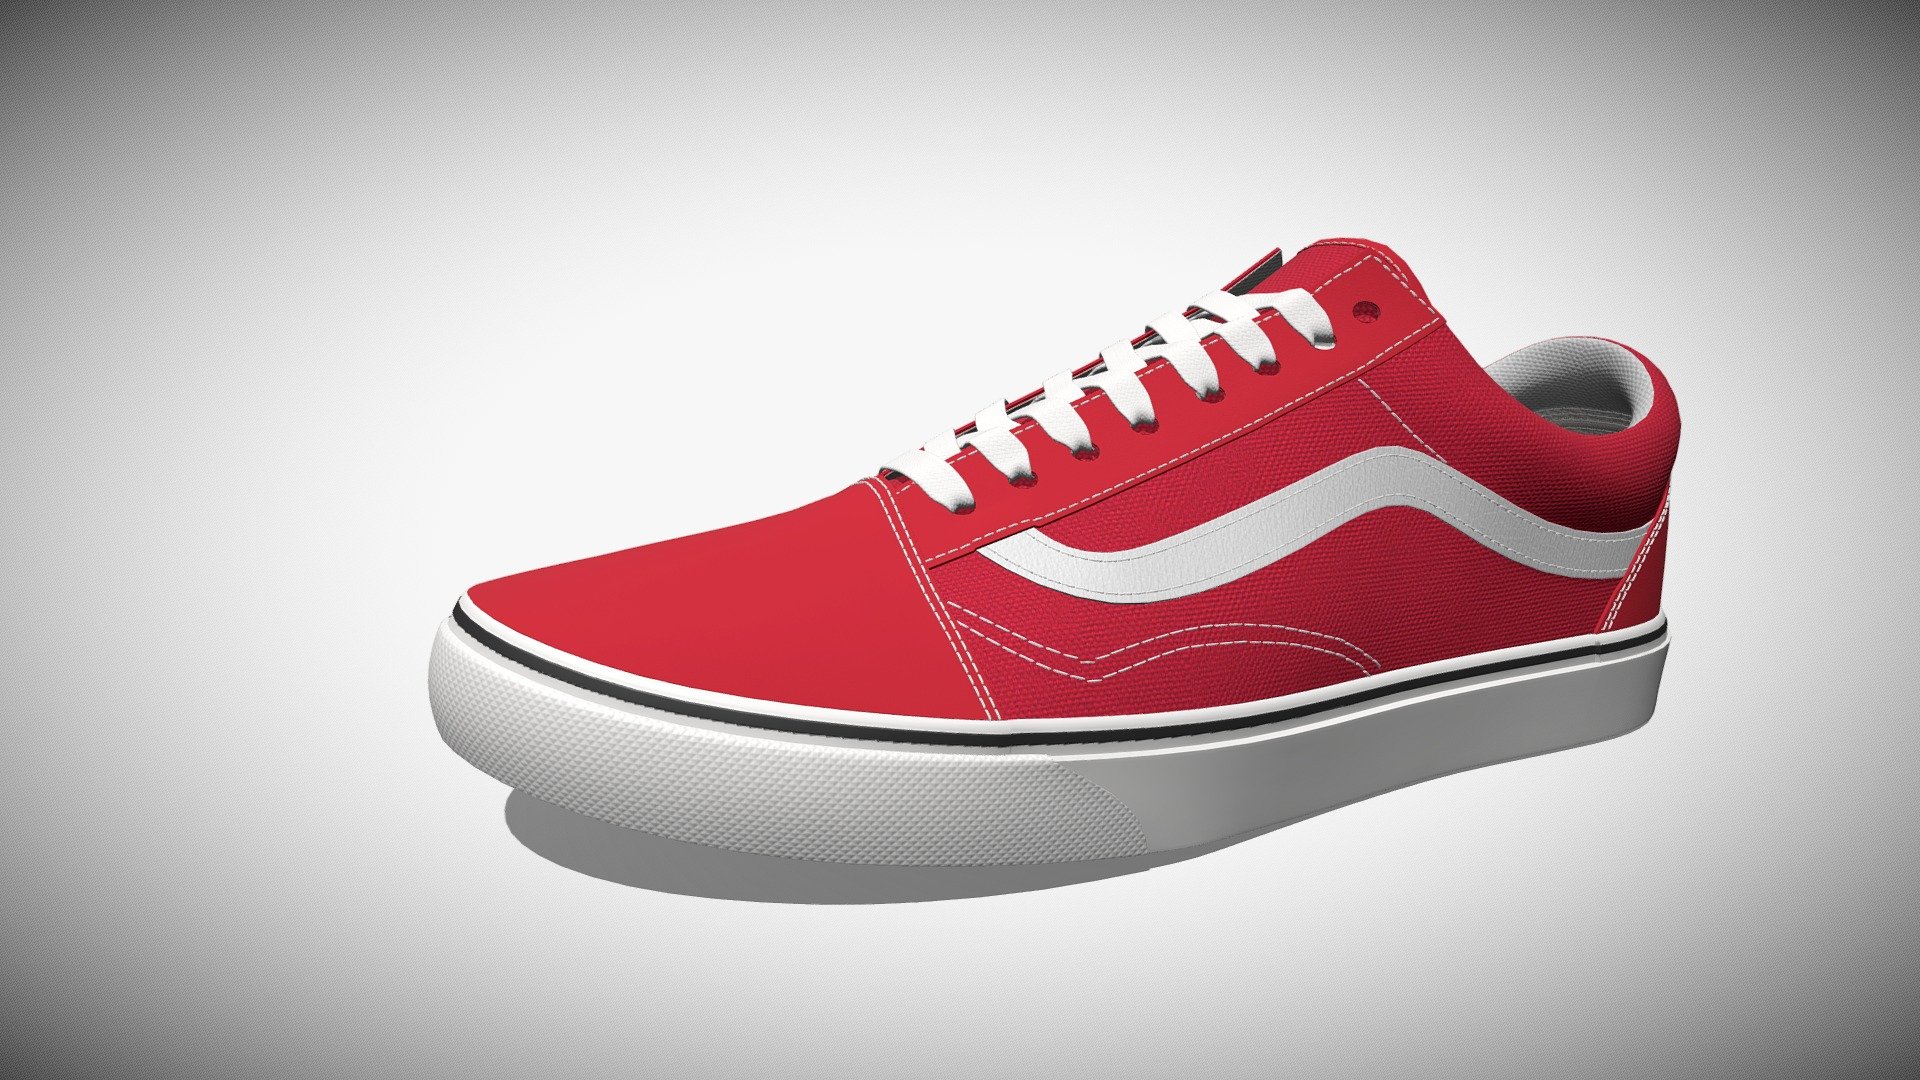 Detailed 3D model of a pair of red and white vans old skool sneakers, modeled in Cinema 4D. The model was created using approximate real world dimensions.

The model has 292,762 polys and 307,808 vertices.

An additional file has been provided containing the original Cinema 4D project file with both standard and v-ray materials, textures and other 3d format such as 3ds, fbx and obj. These files contain both the left and right pair of the shoes 3d model